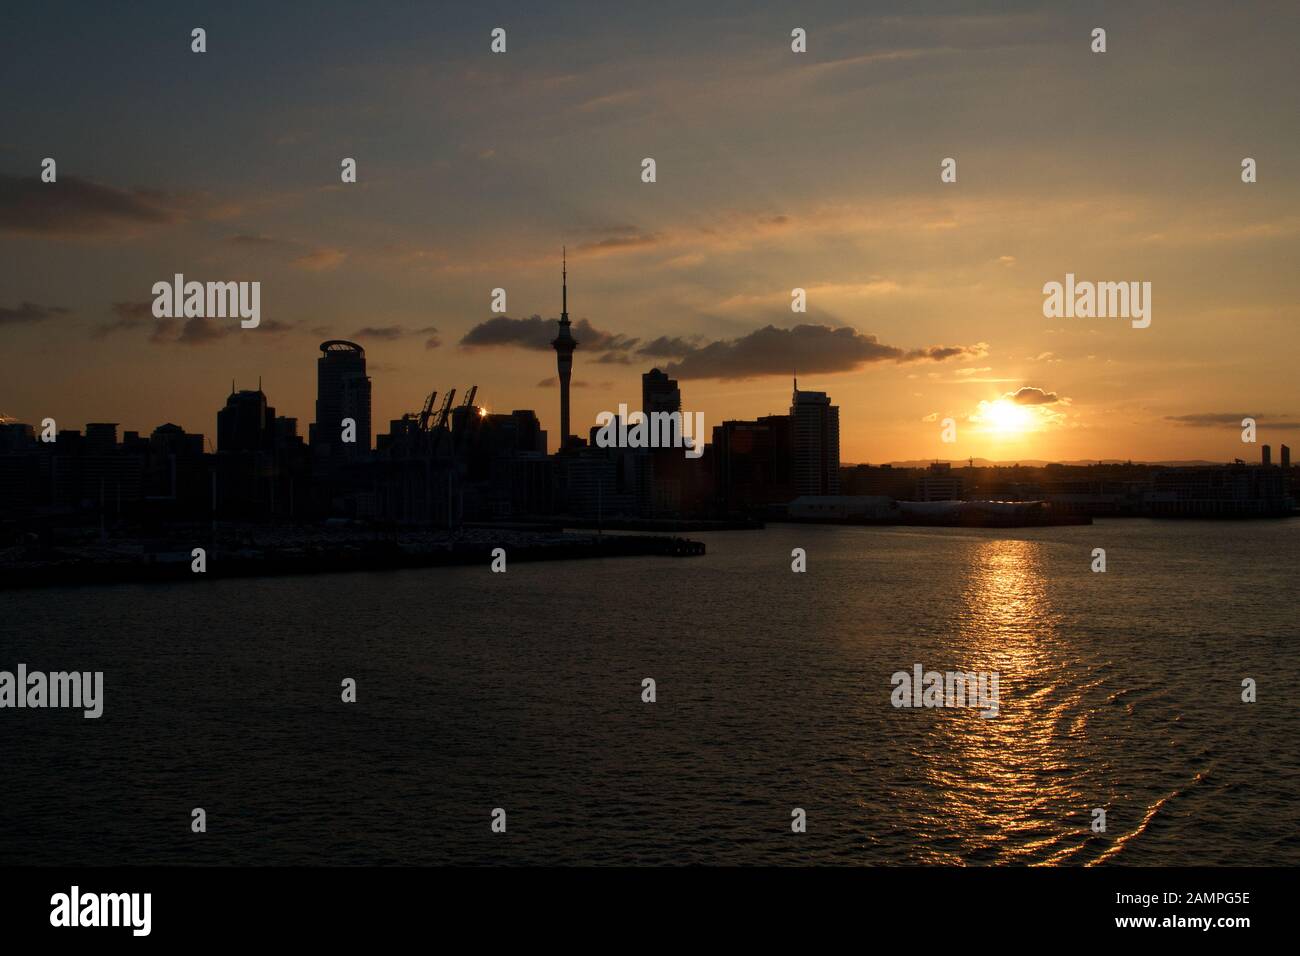 Silhouette of the Auckland, New Zealand skyline at sunset. Stock Photo